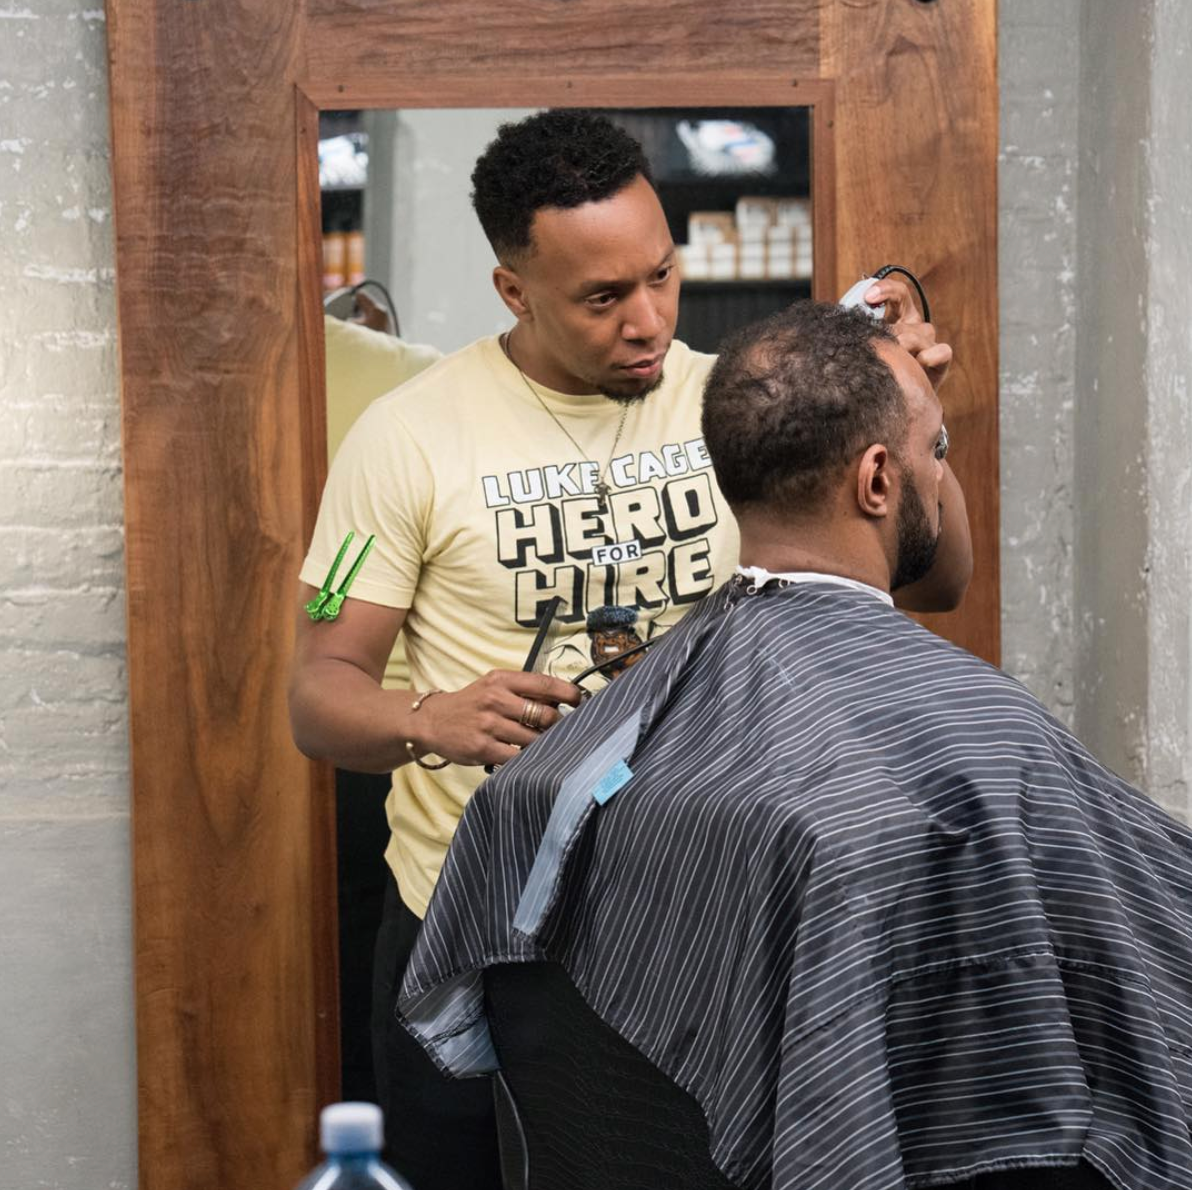 Meet the barber creating a new direction in the men’s grooming industry